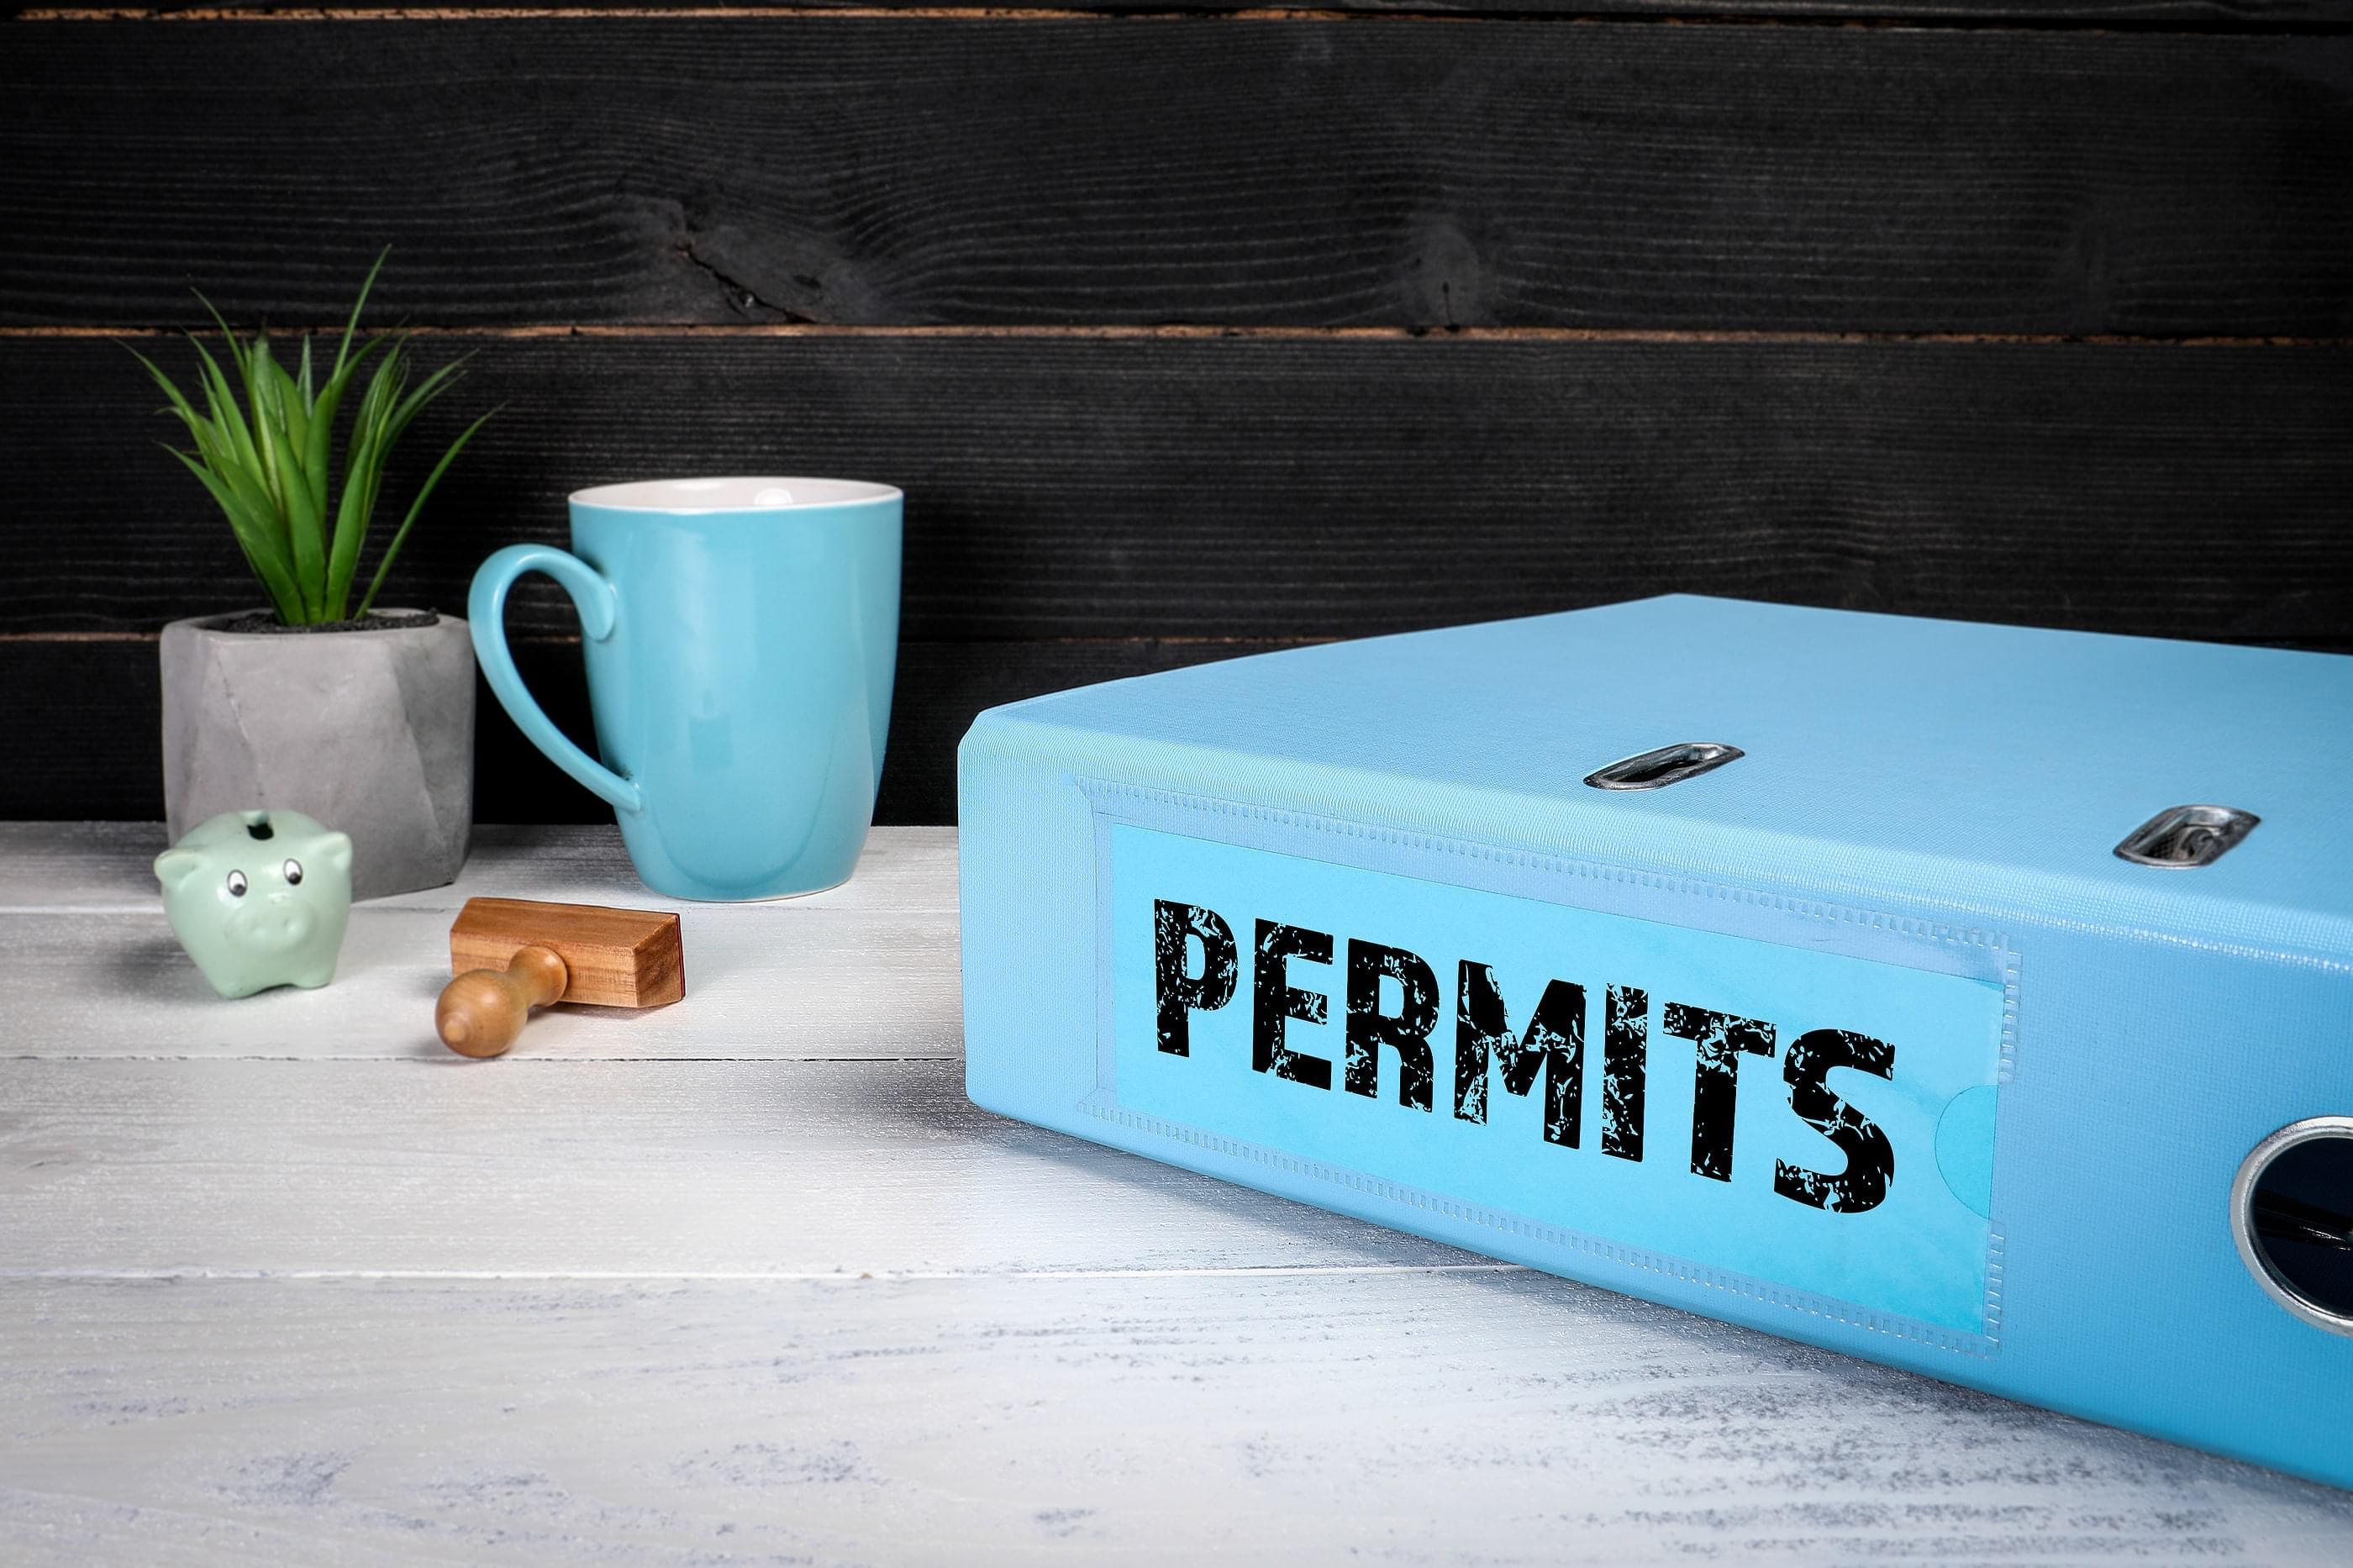 A blue binder labeled "Permits" on a table with a plant, a blue coffee cup, a piggy bank, and a stamp.